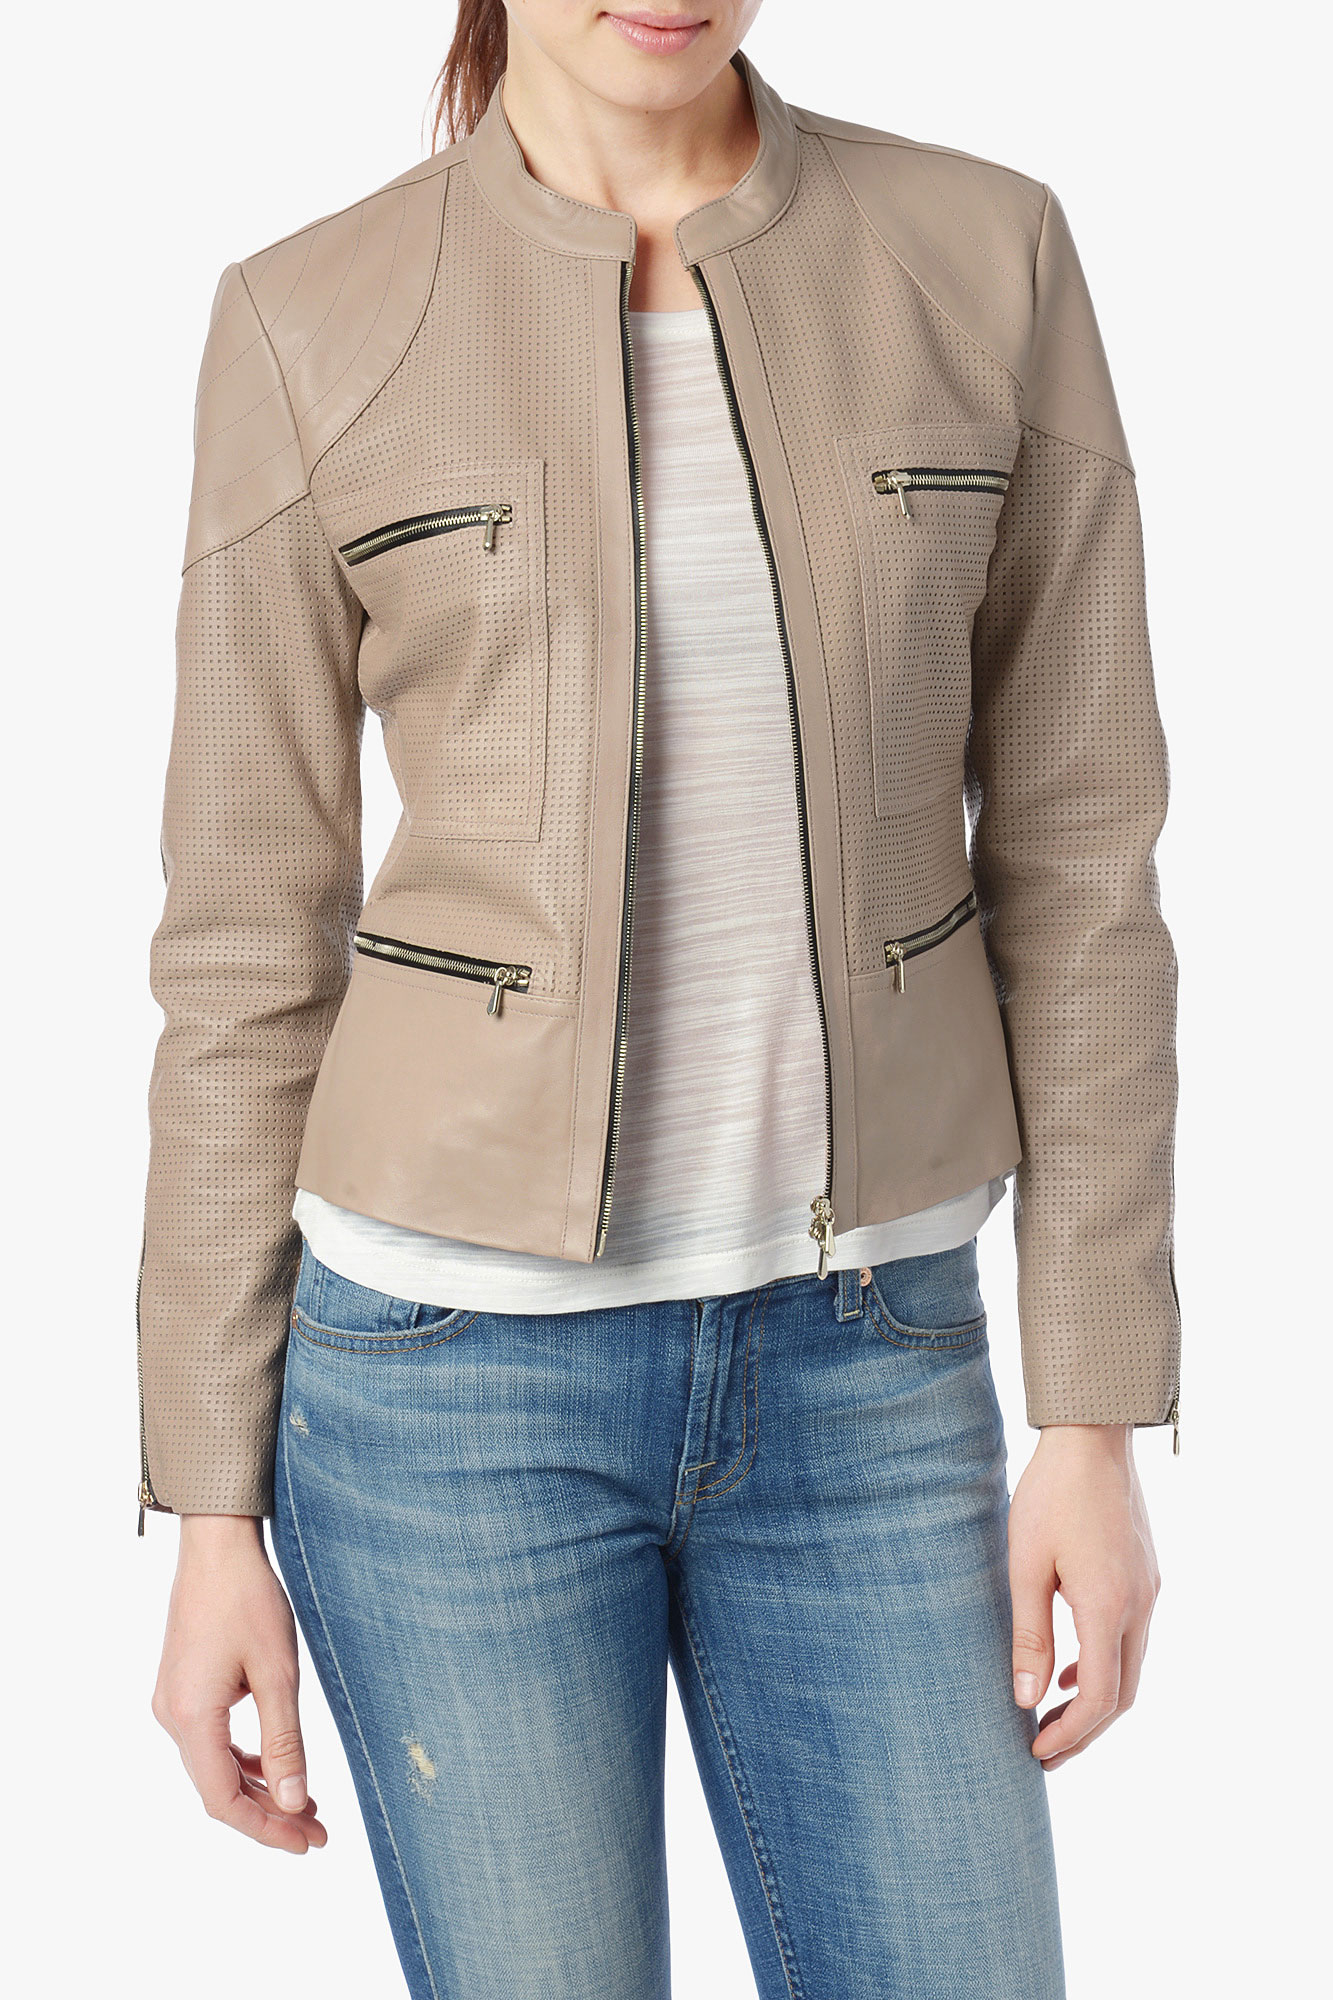 Lyst - 7 for all mankind Perforated Leather Jacket in Blush P in Natural